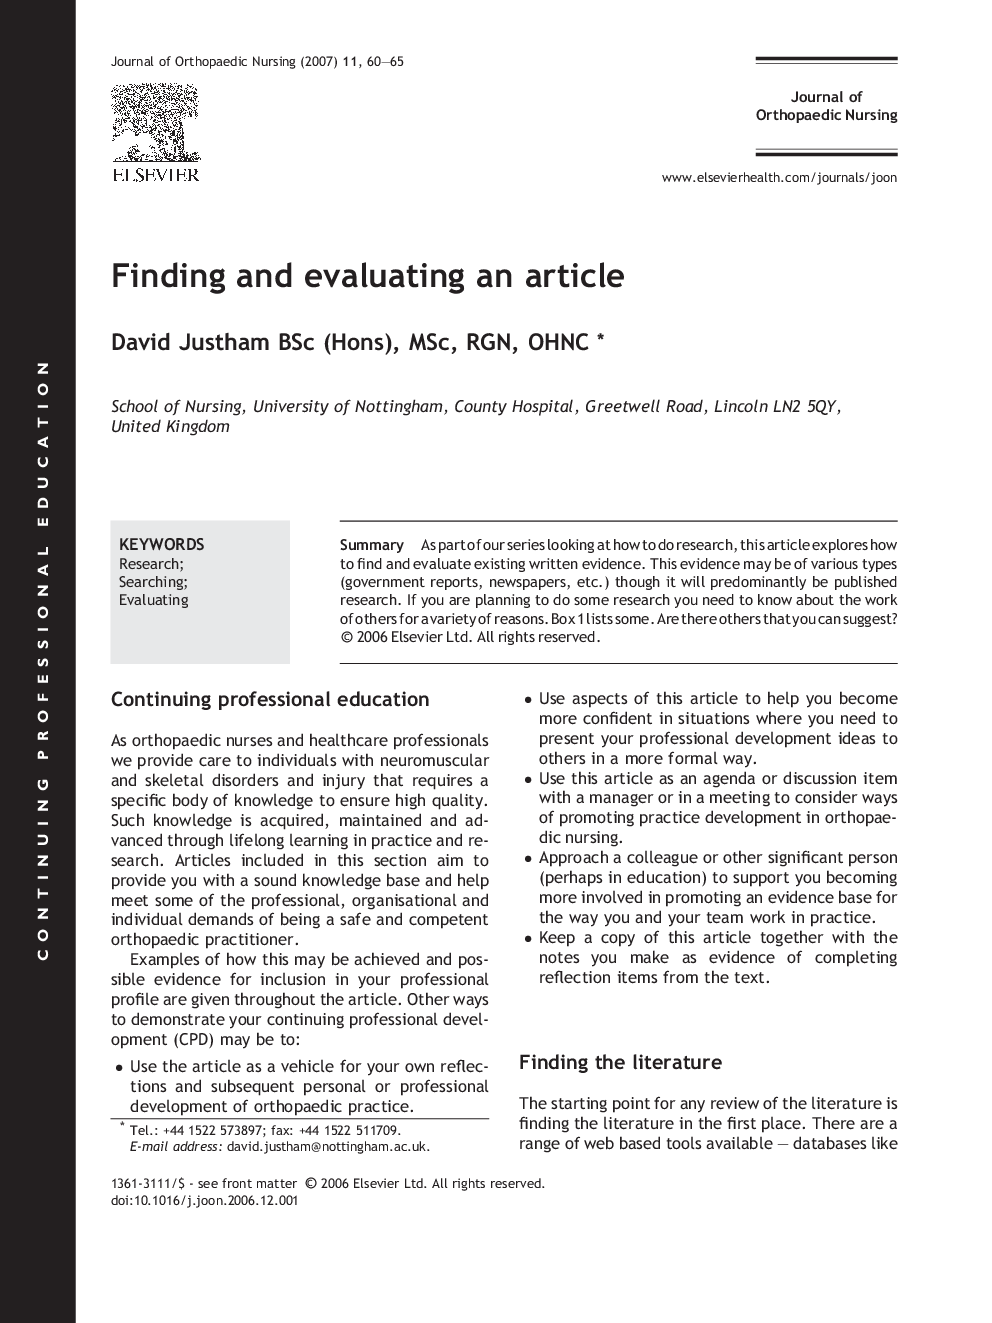 Finding and evaluating an article